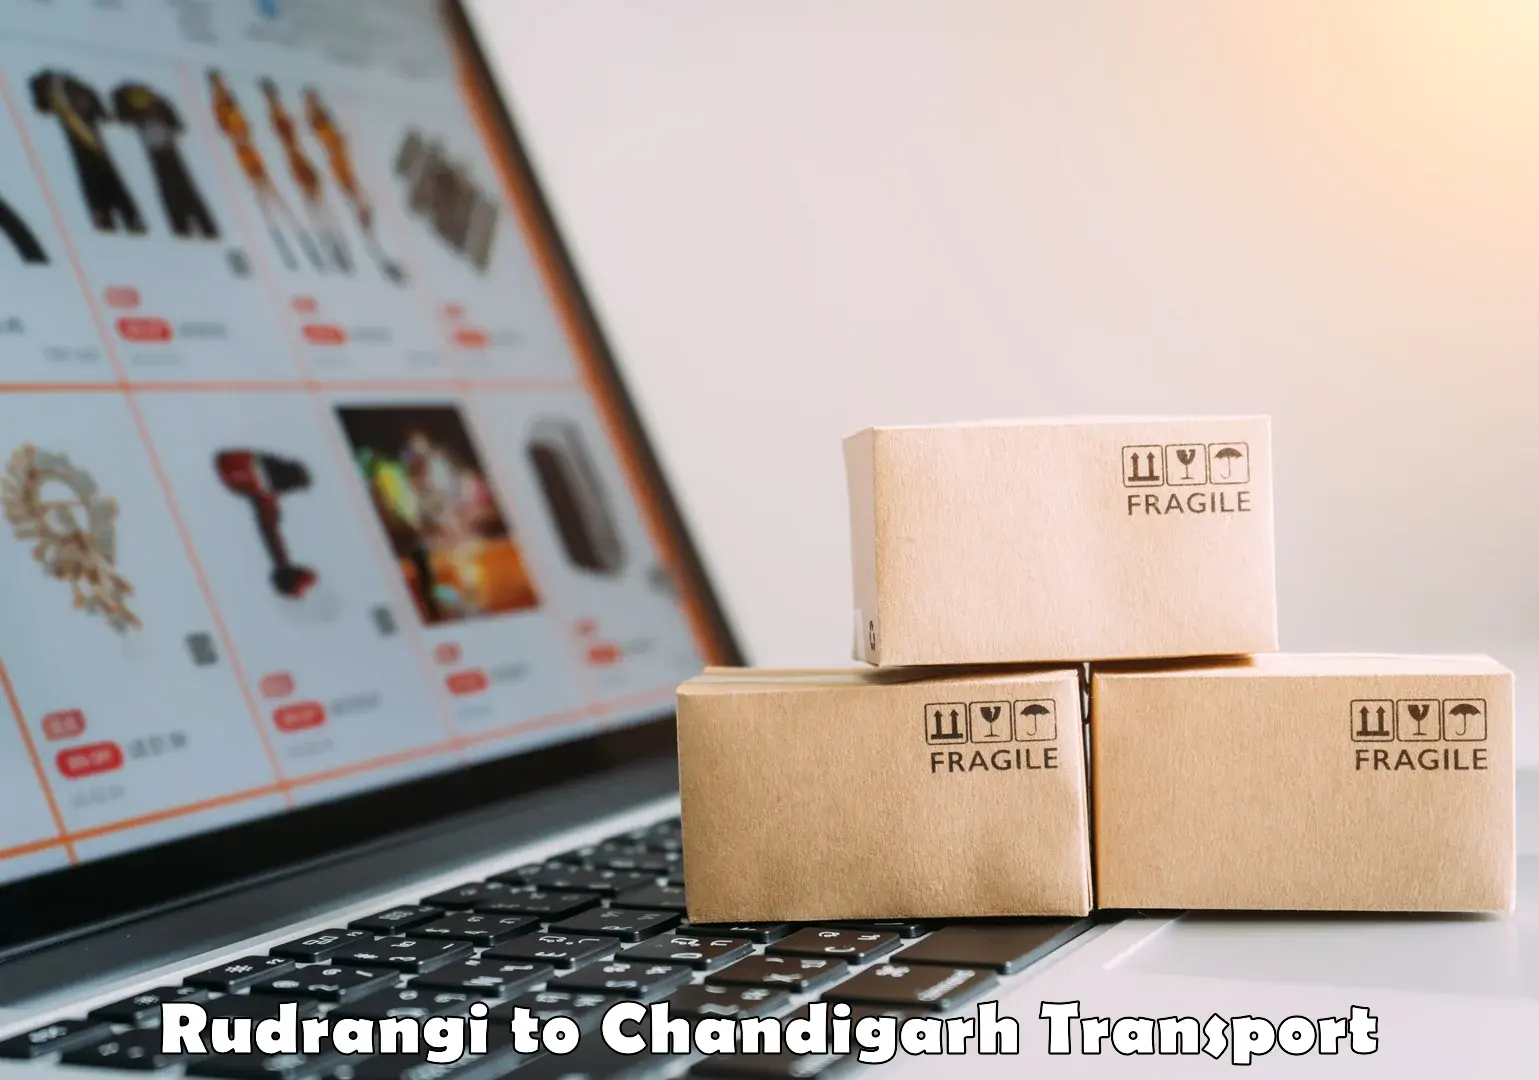 Container transportation services Rudrangi to Chandigarh